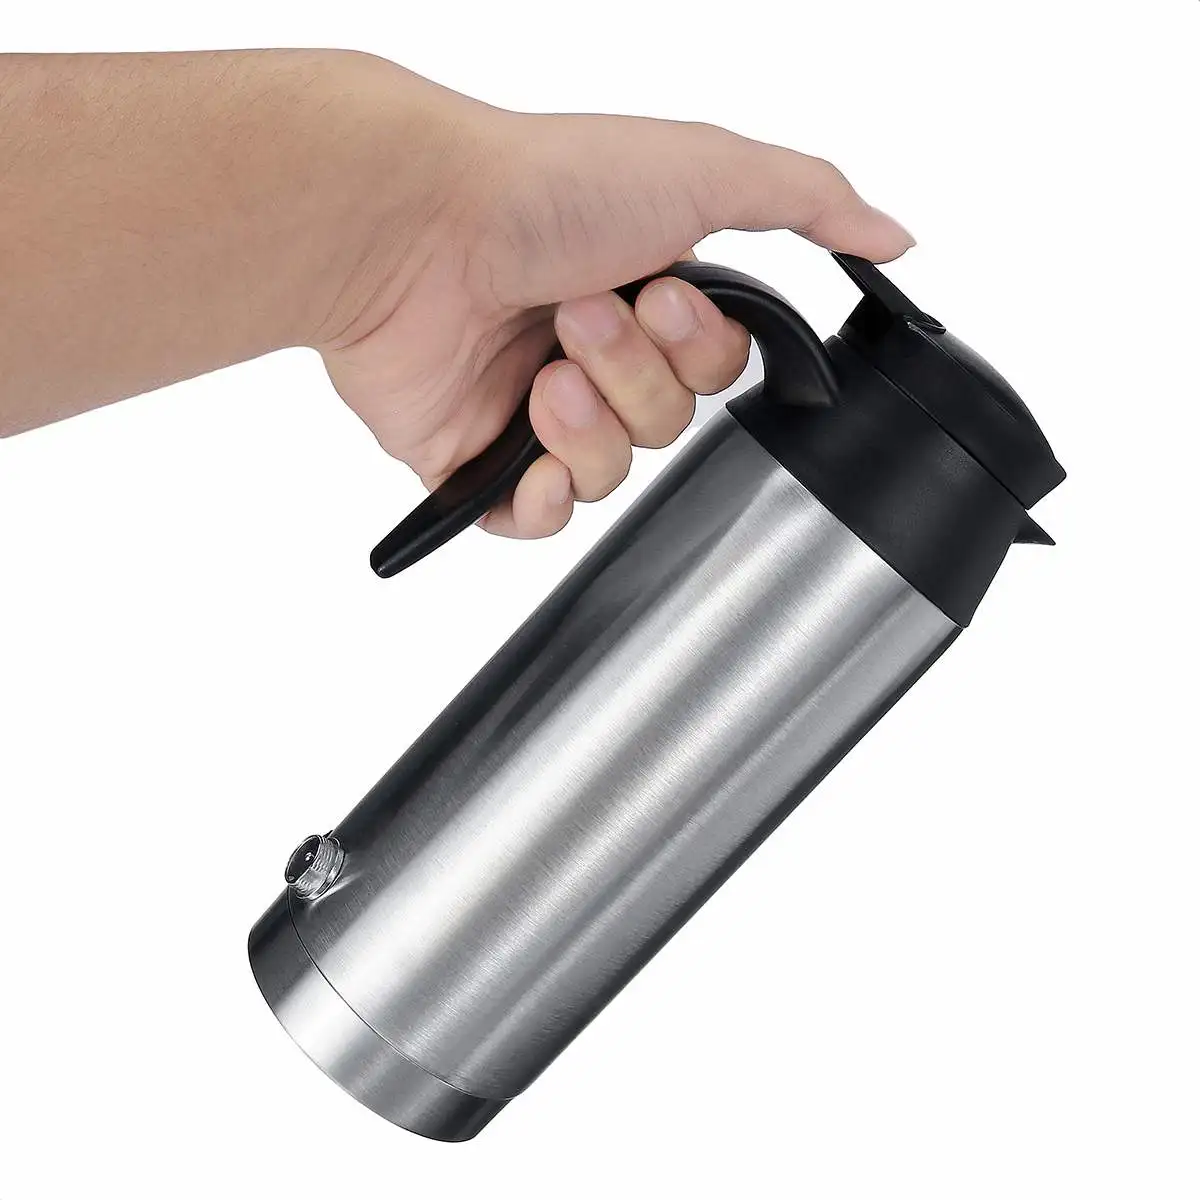 Portable Electric Kettle,Car Kettle Thermos, Travel Car Kettle,300ml Car  Electric Coffee Tea Water Mug Vehicle Heating Drinking Cup Bottle(24V)